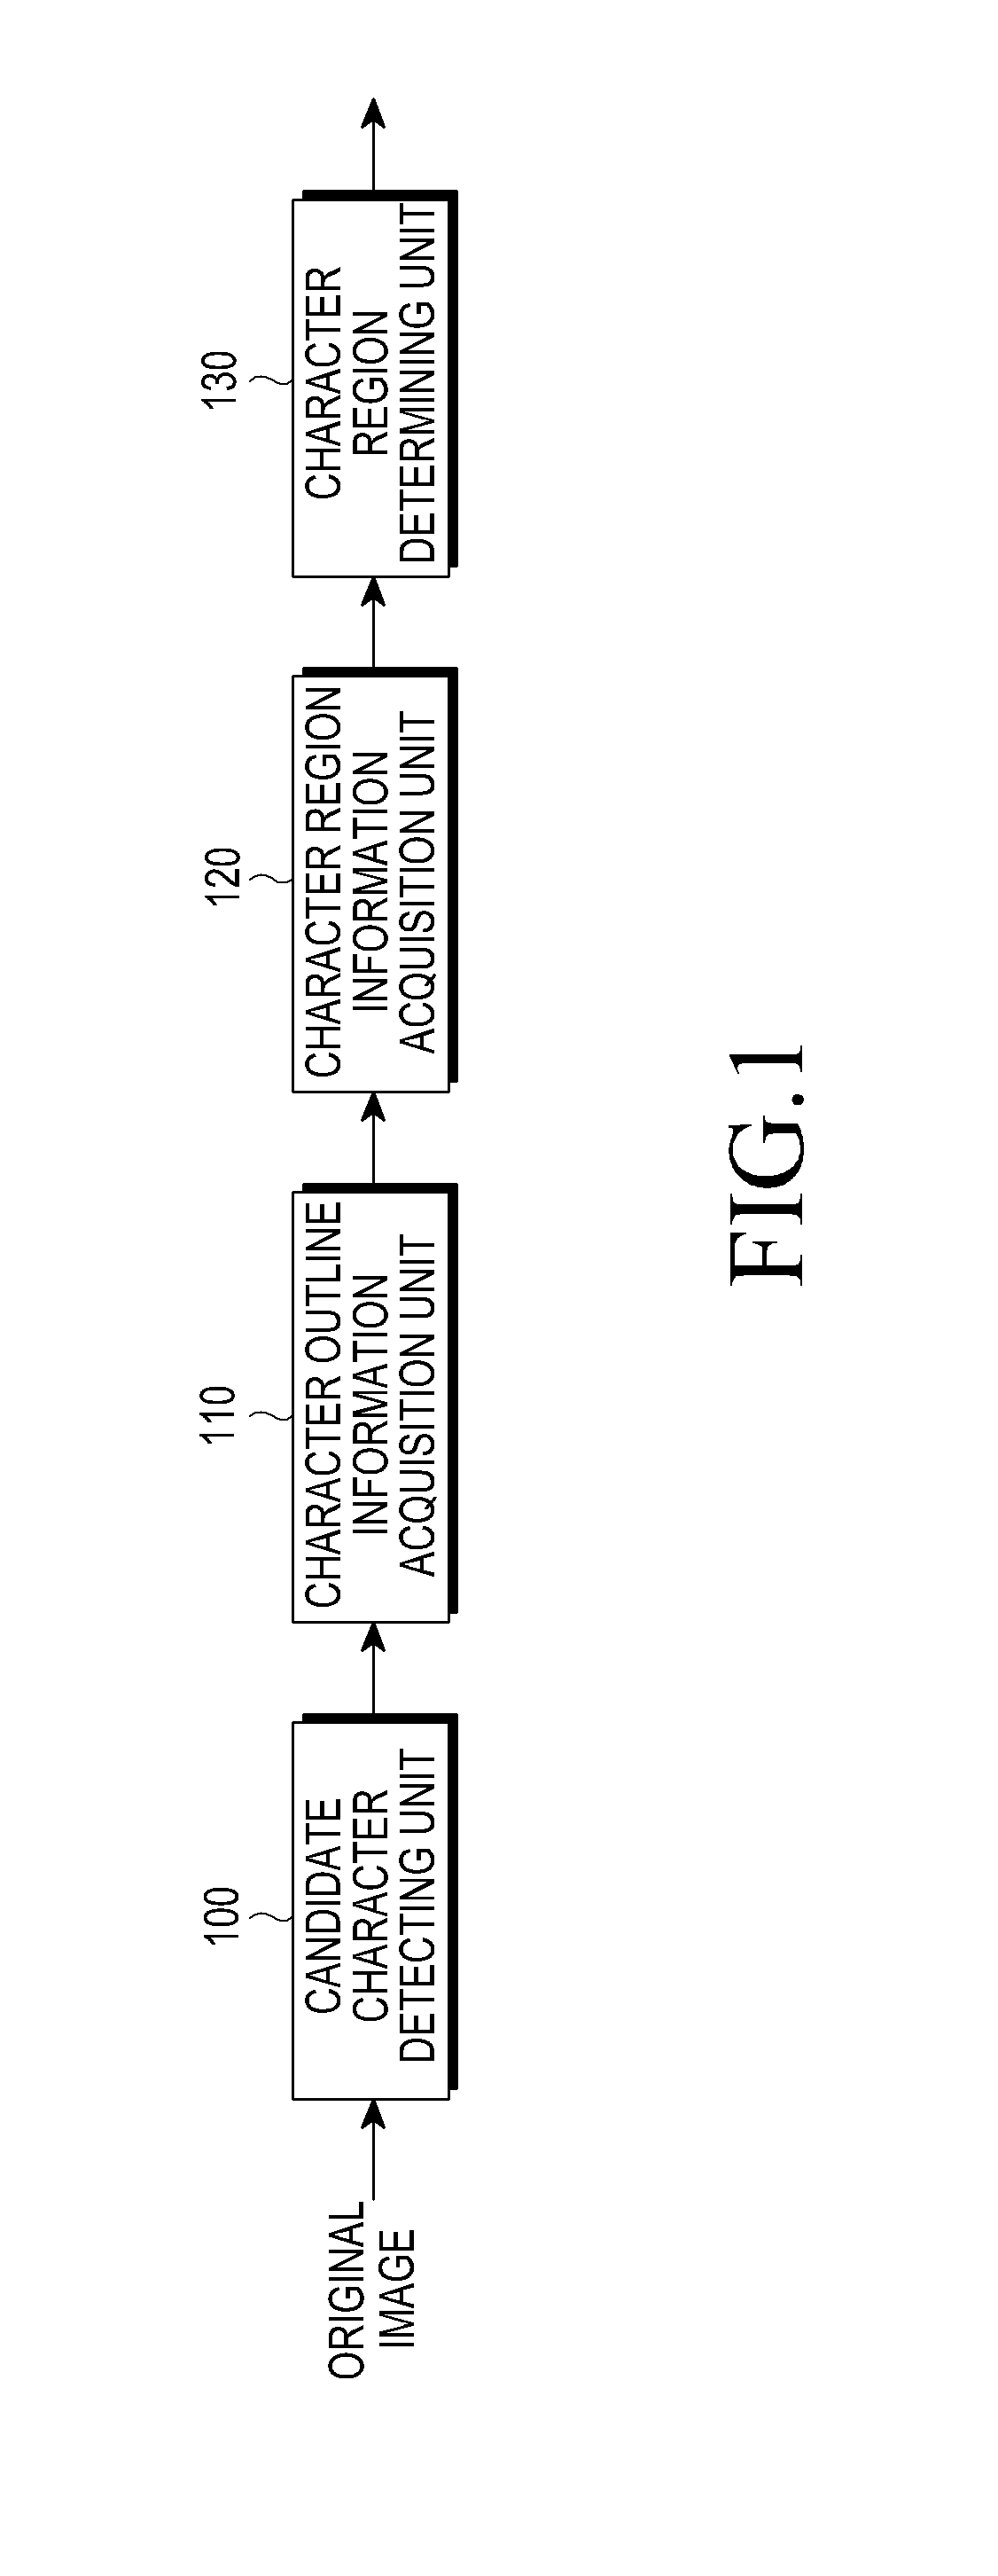 Character region extracting apparatus and method using character stroke width calculation